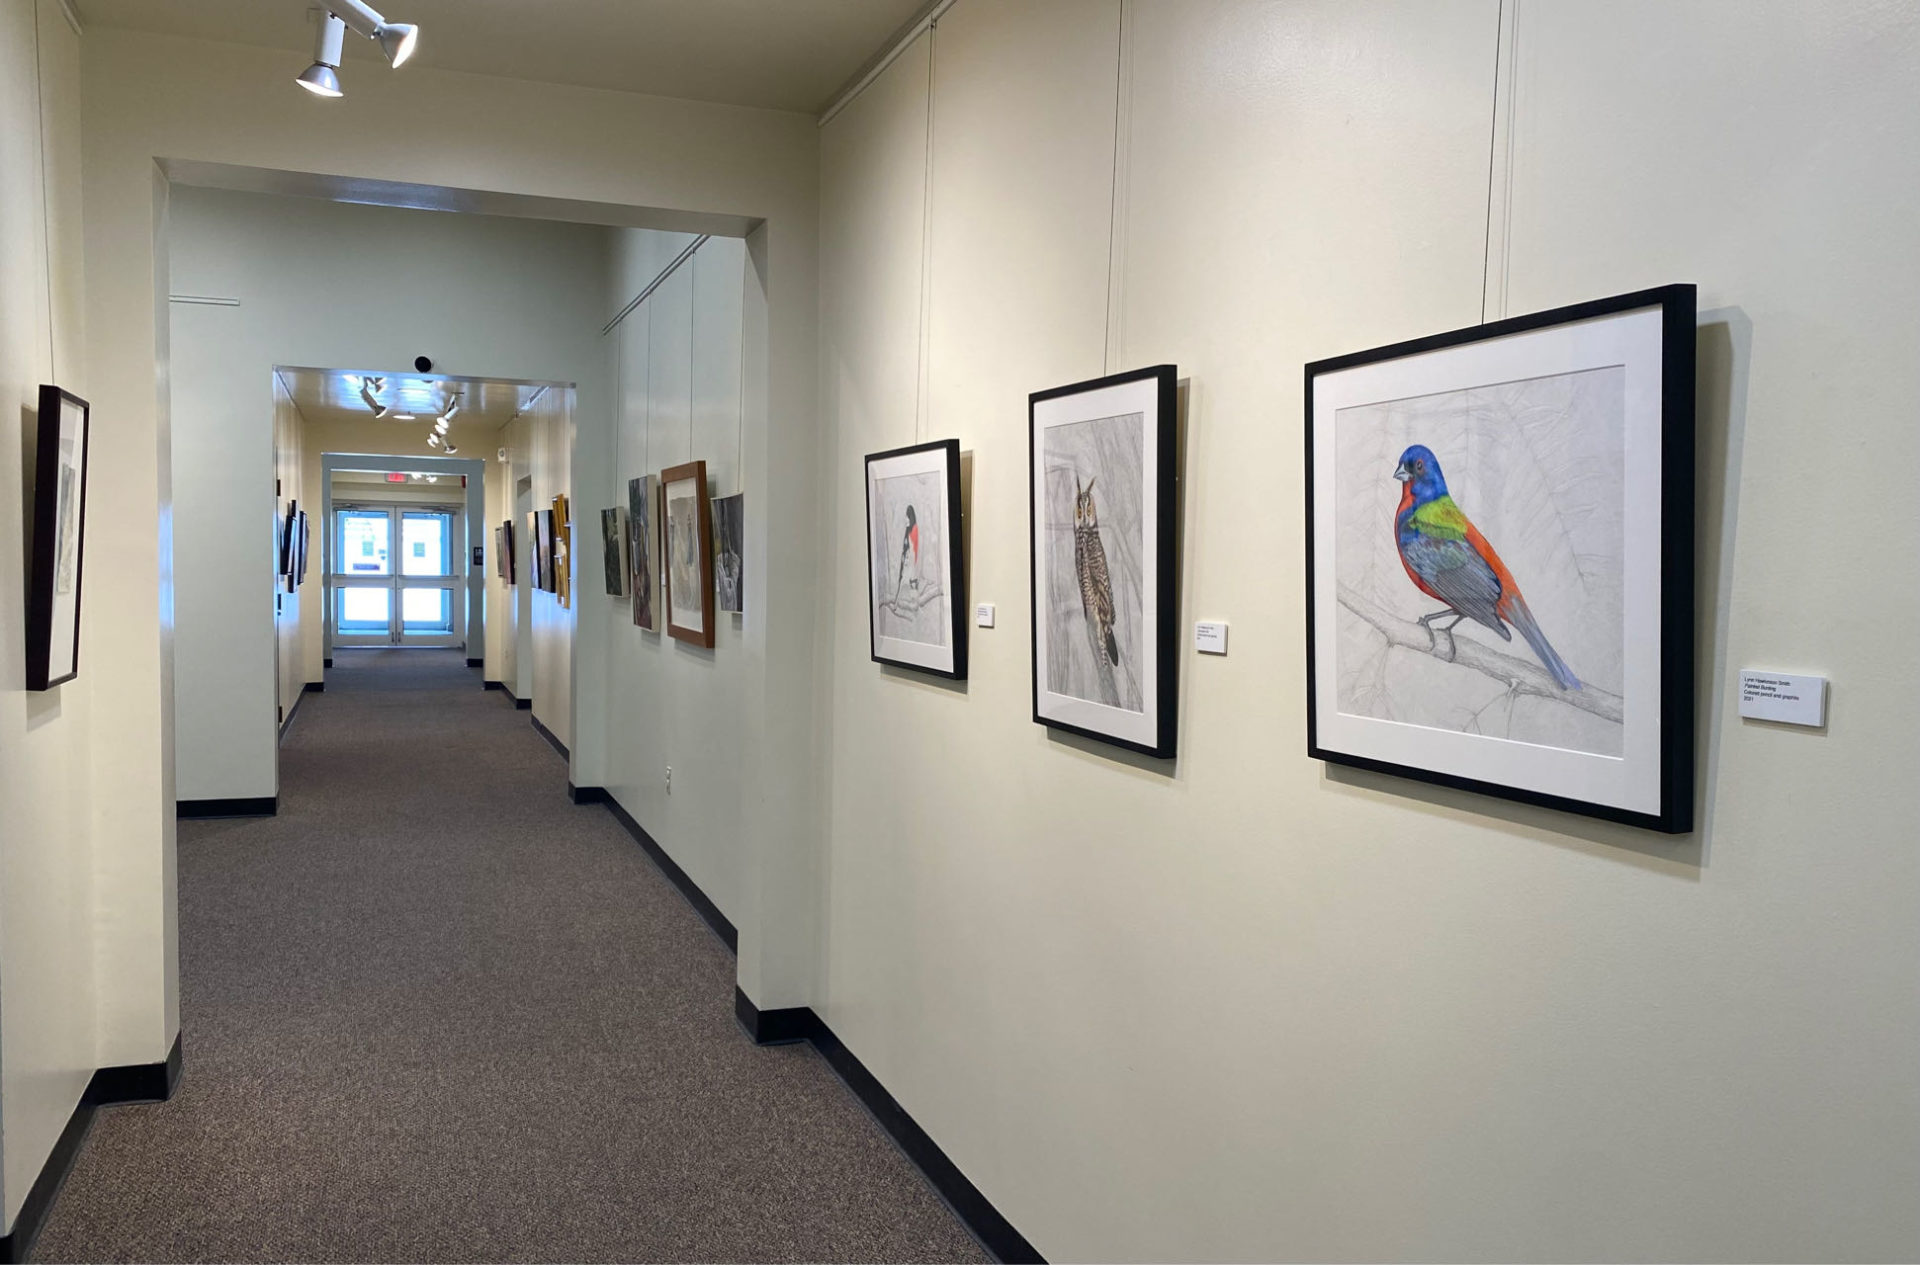 Hanging in the above exhibition on the right side wall are some colored pencil and graphite paintings/drawings by Lynn Smith.